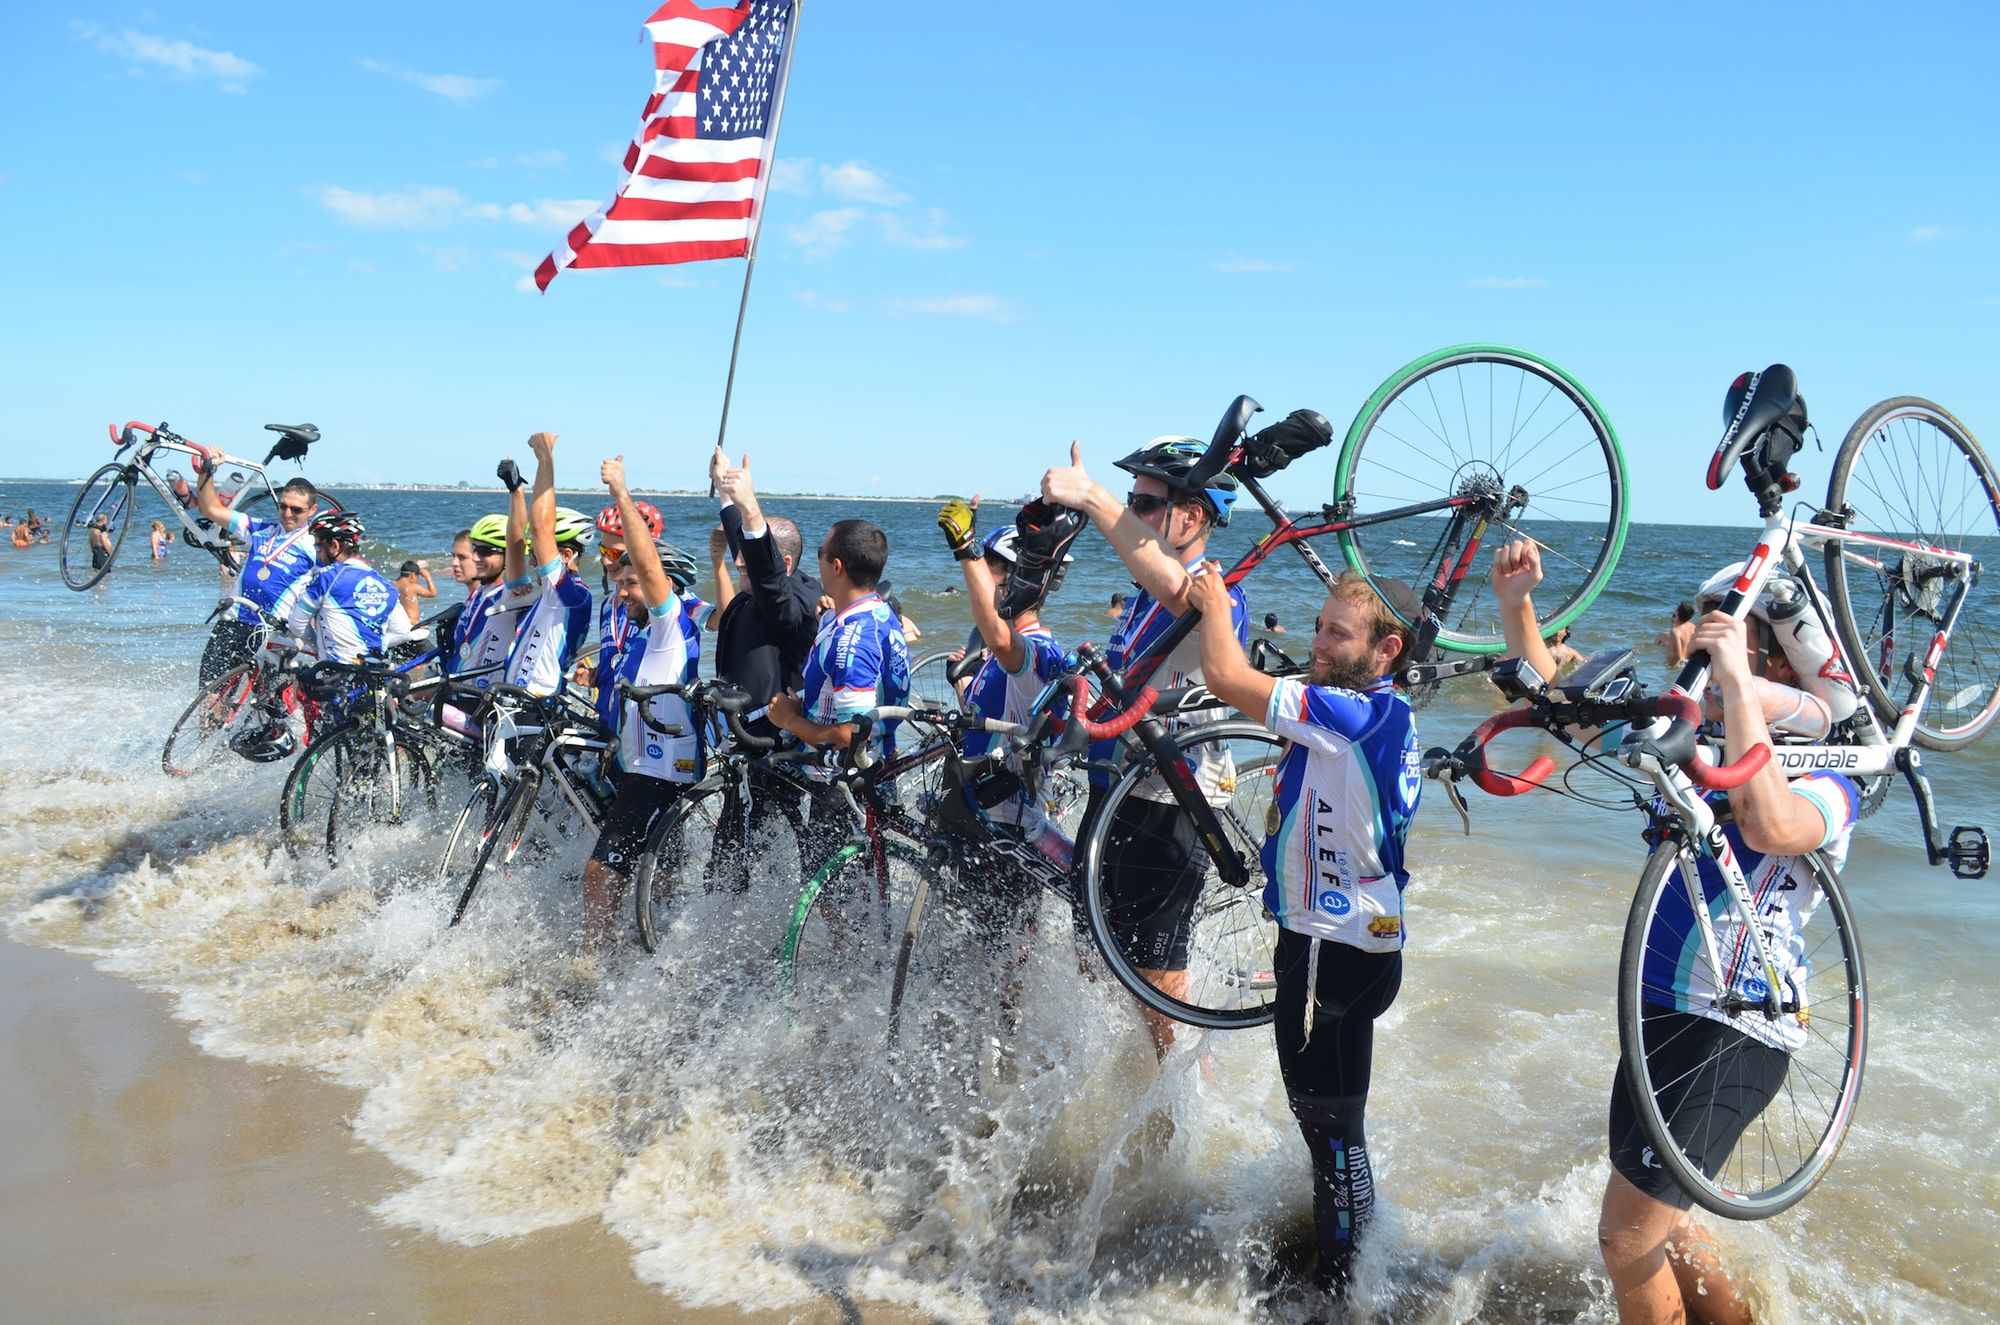 Bike 4 Friendship Team Completes Coast-To-Coast Journey, Helps Raise $150,000 For Charity